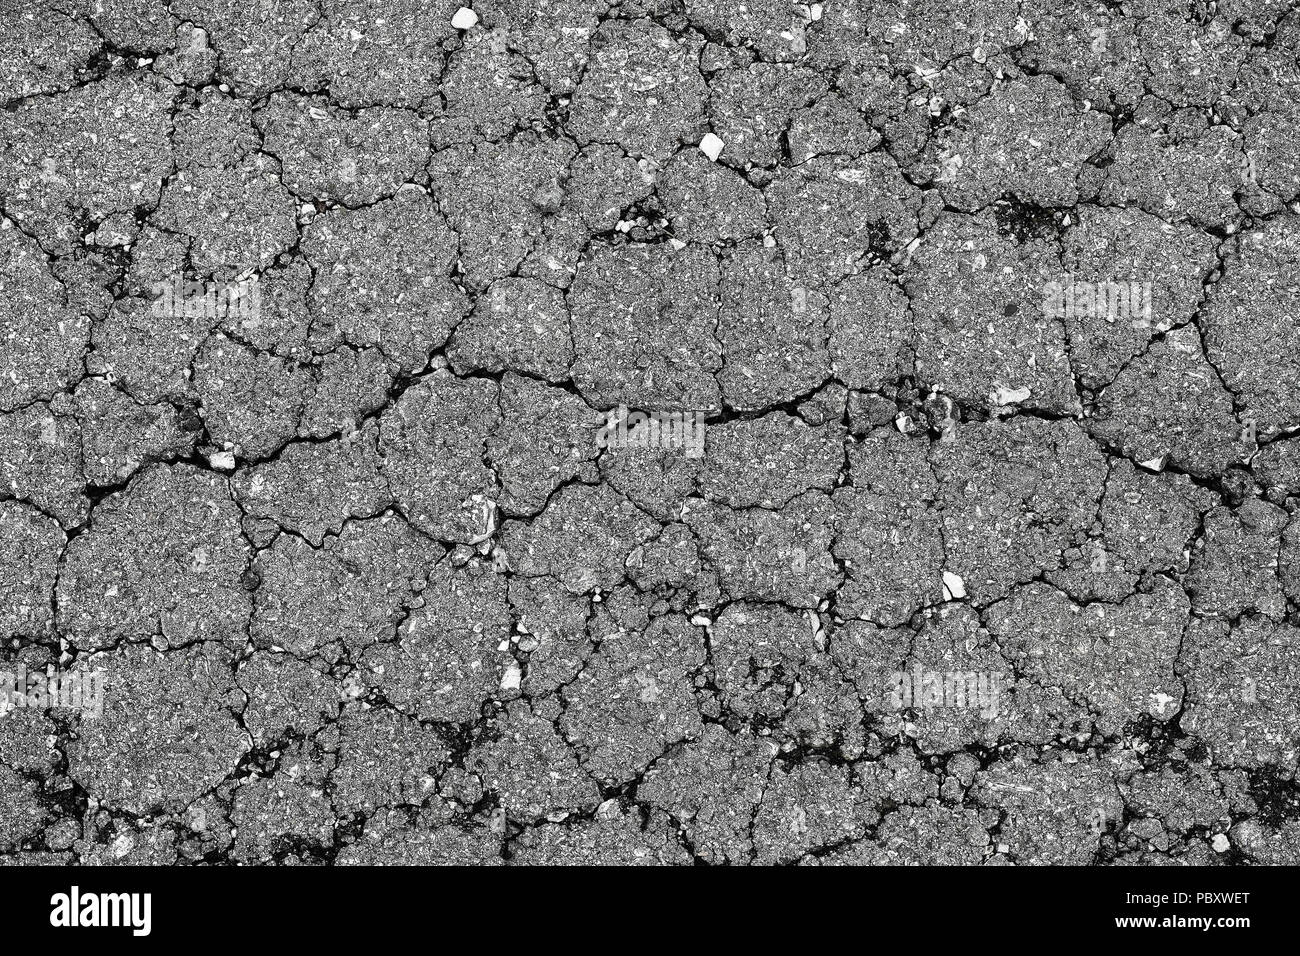 Crack asphalt pavement texture with small rocks High Resolution Background for highway backdrop design Stock Photo